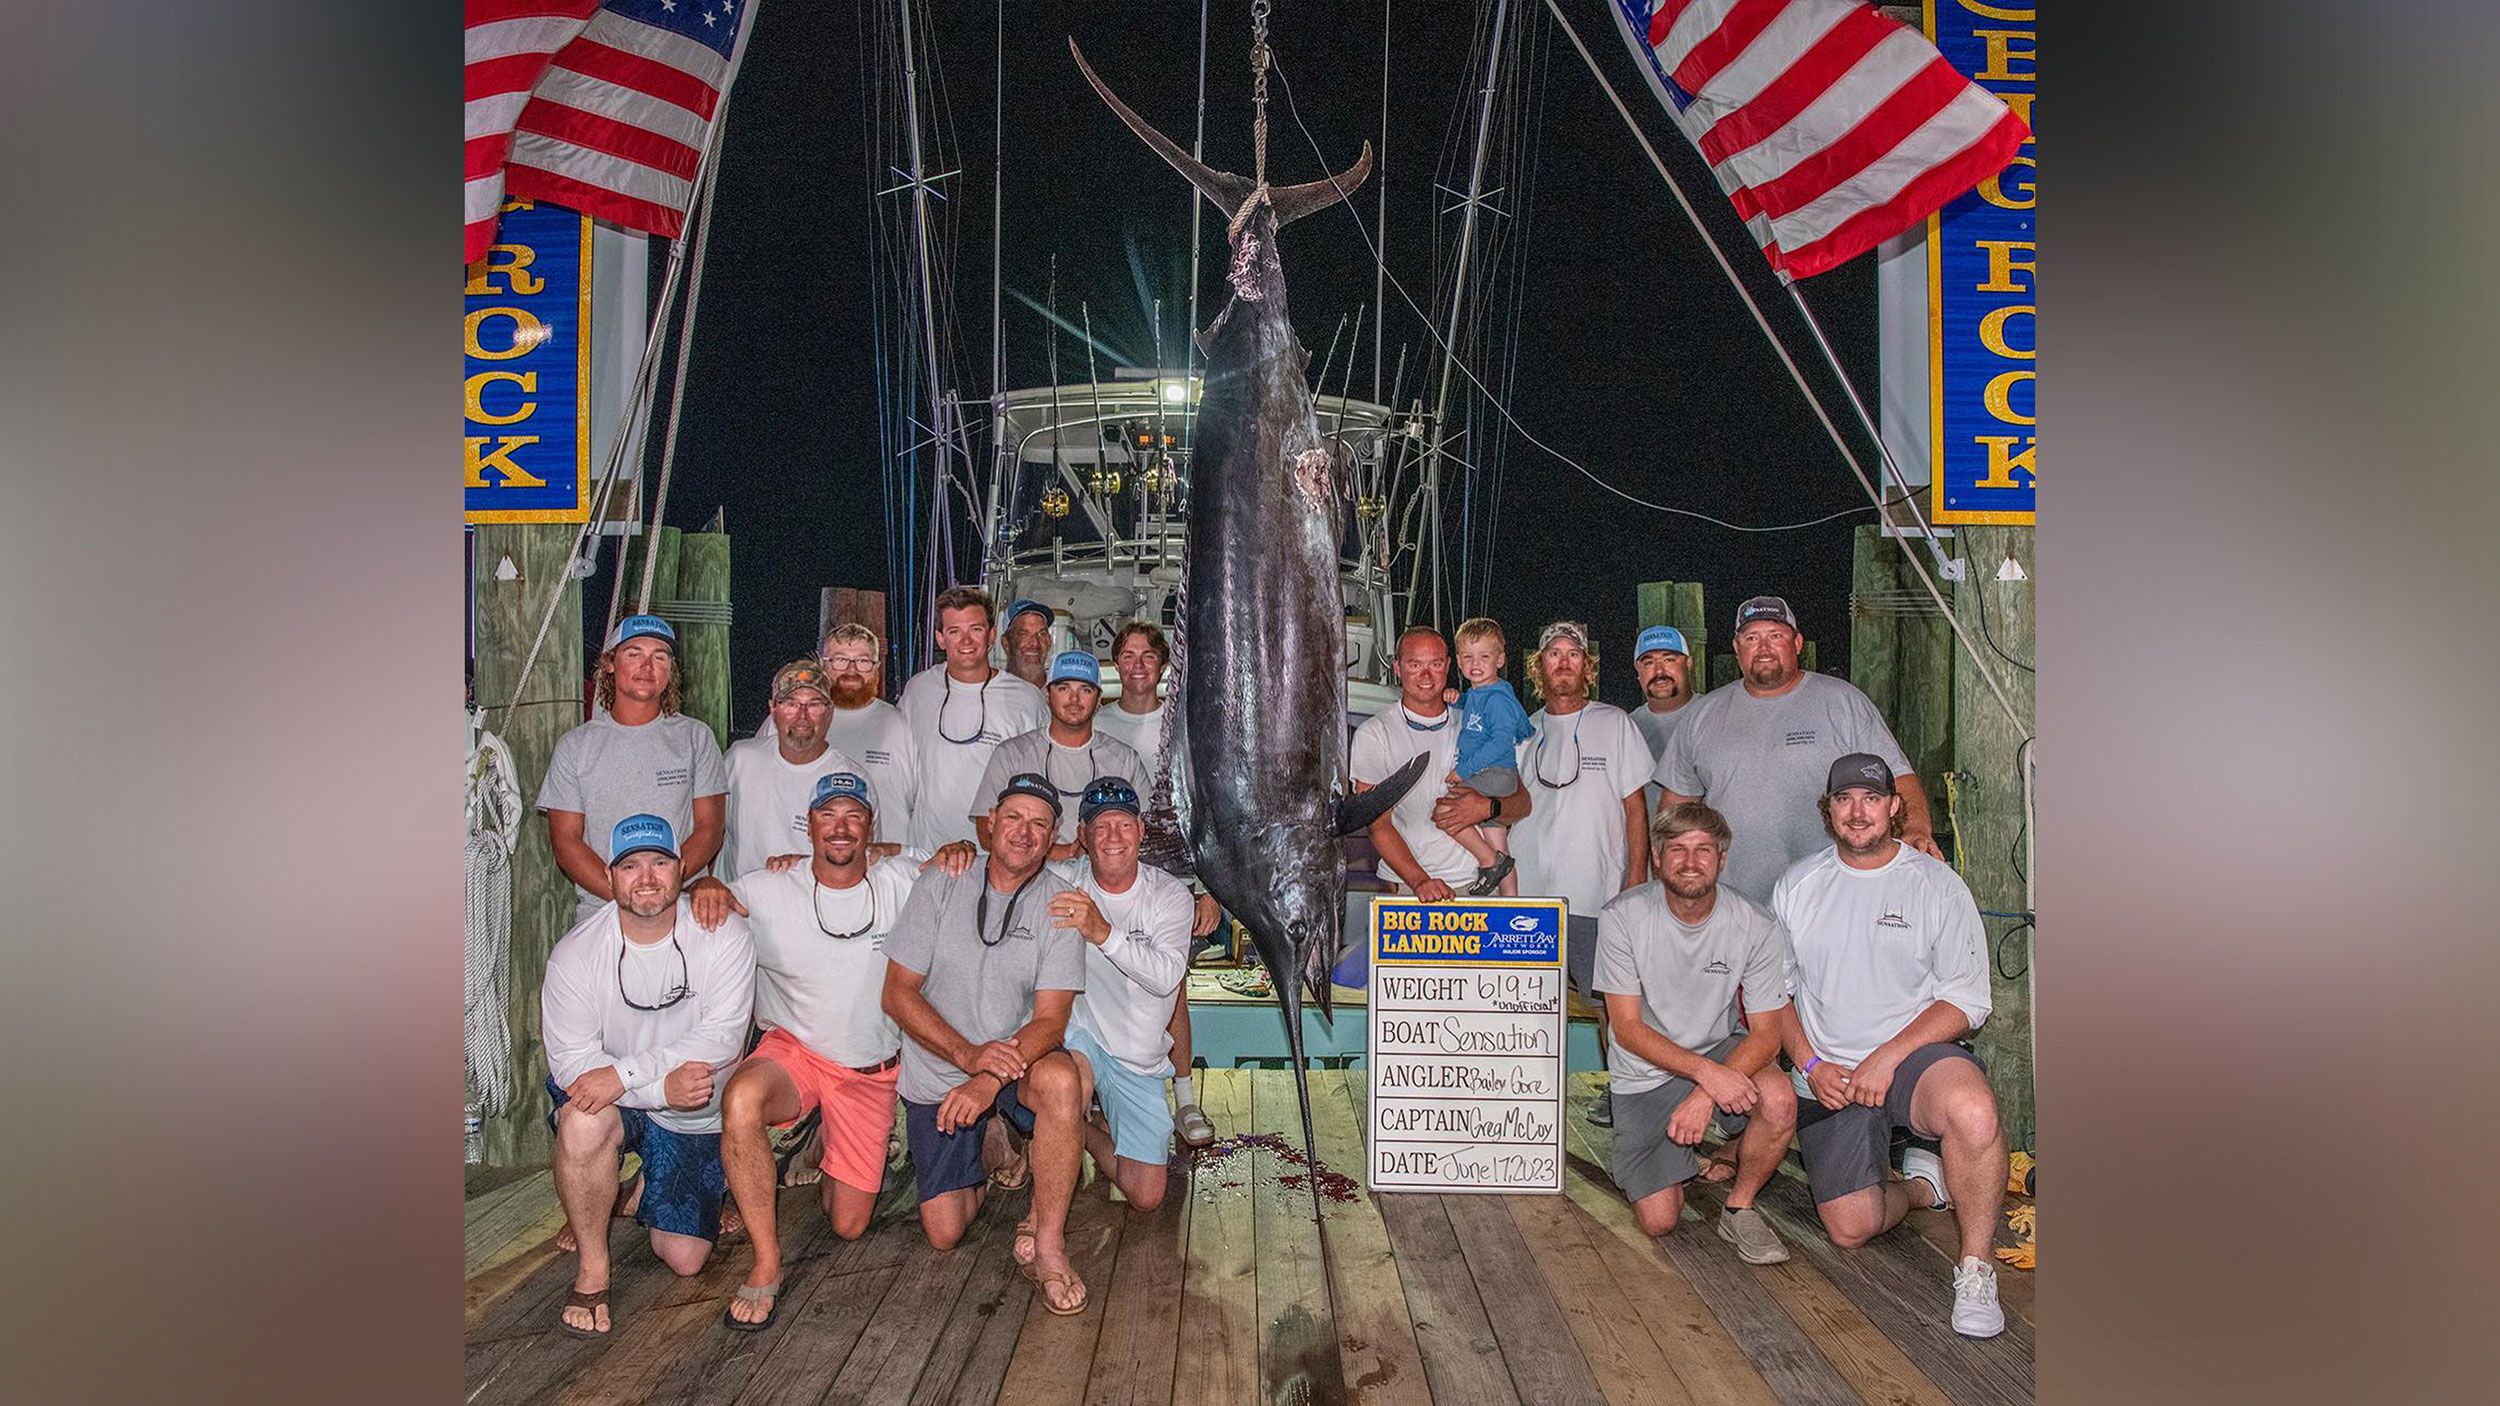 Captain of fishing boat disqualified for 'mutilated' marlin says